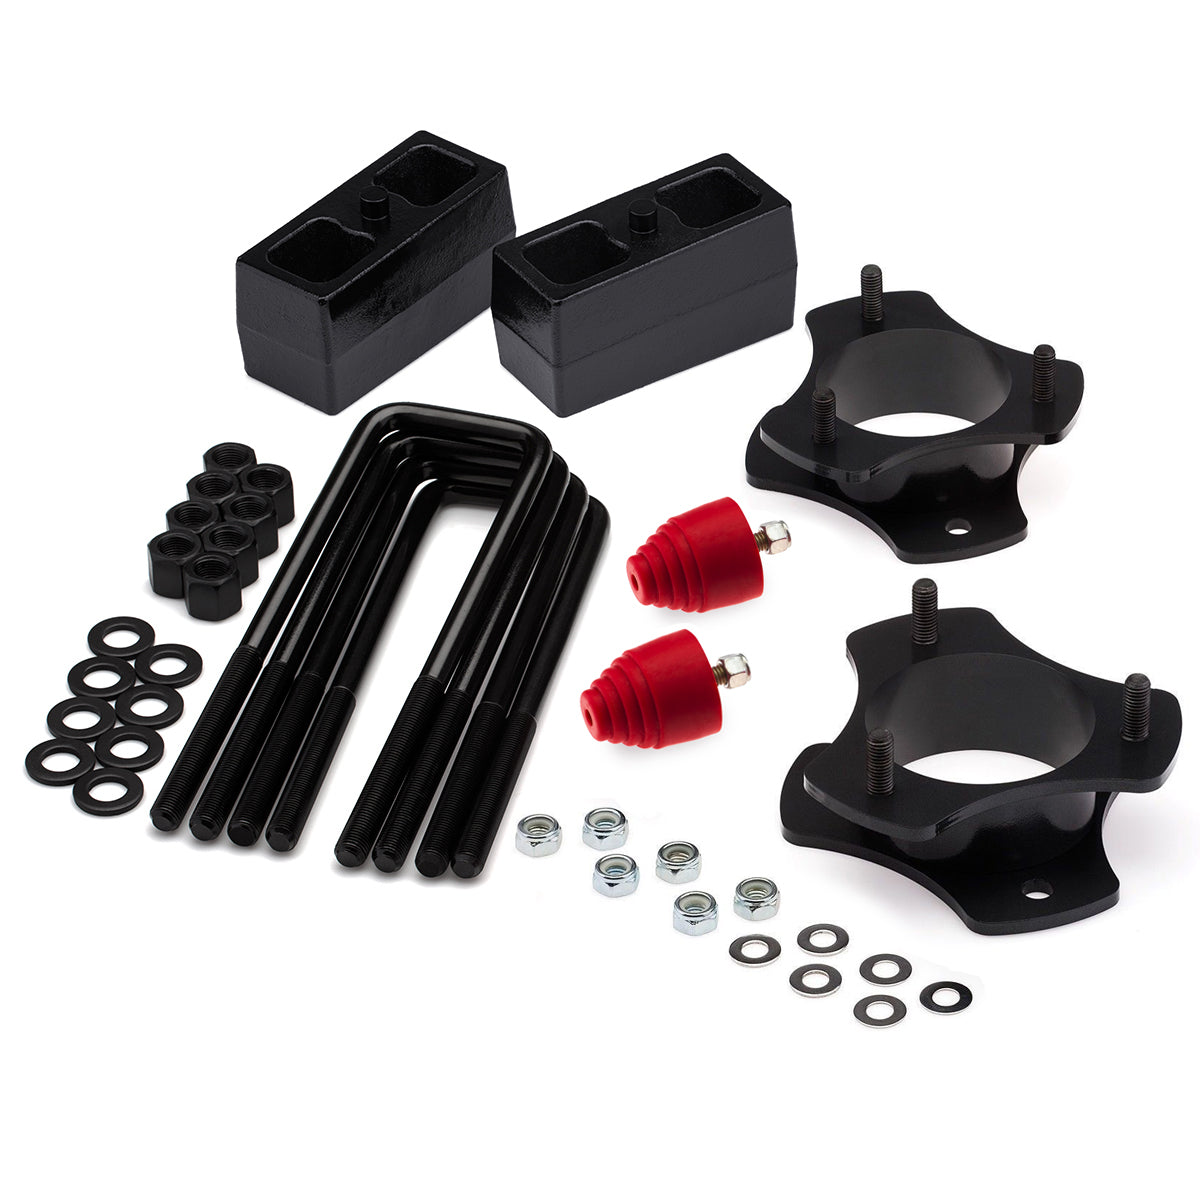 2004-2015 Nissan Armada 2WD 4WD Full Lift Kit with Bump Stops